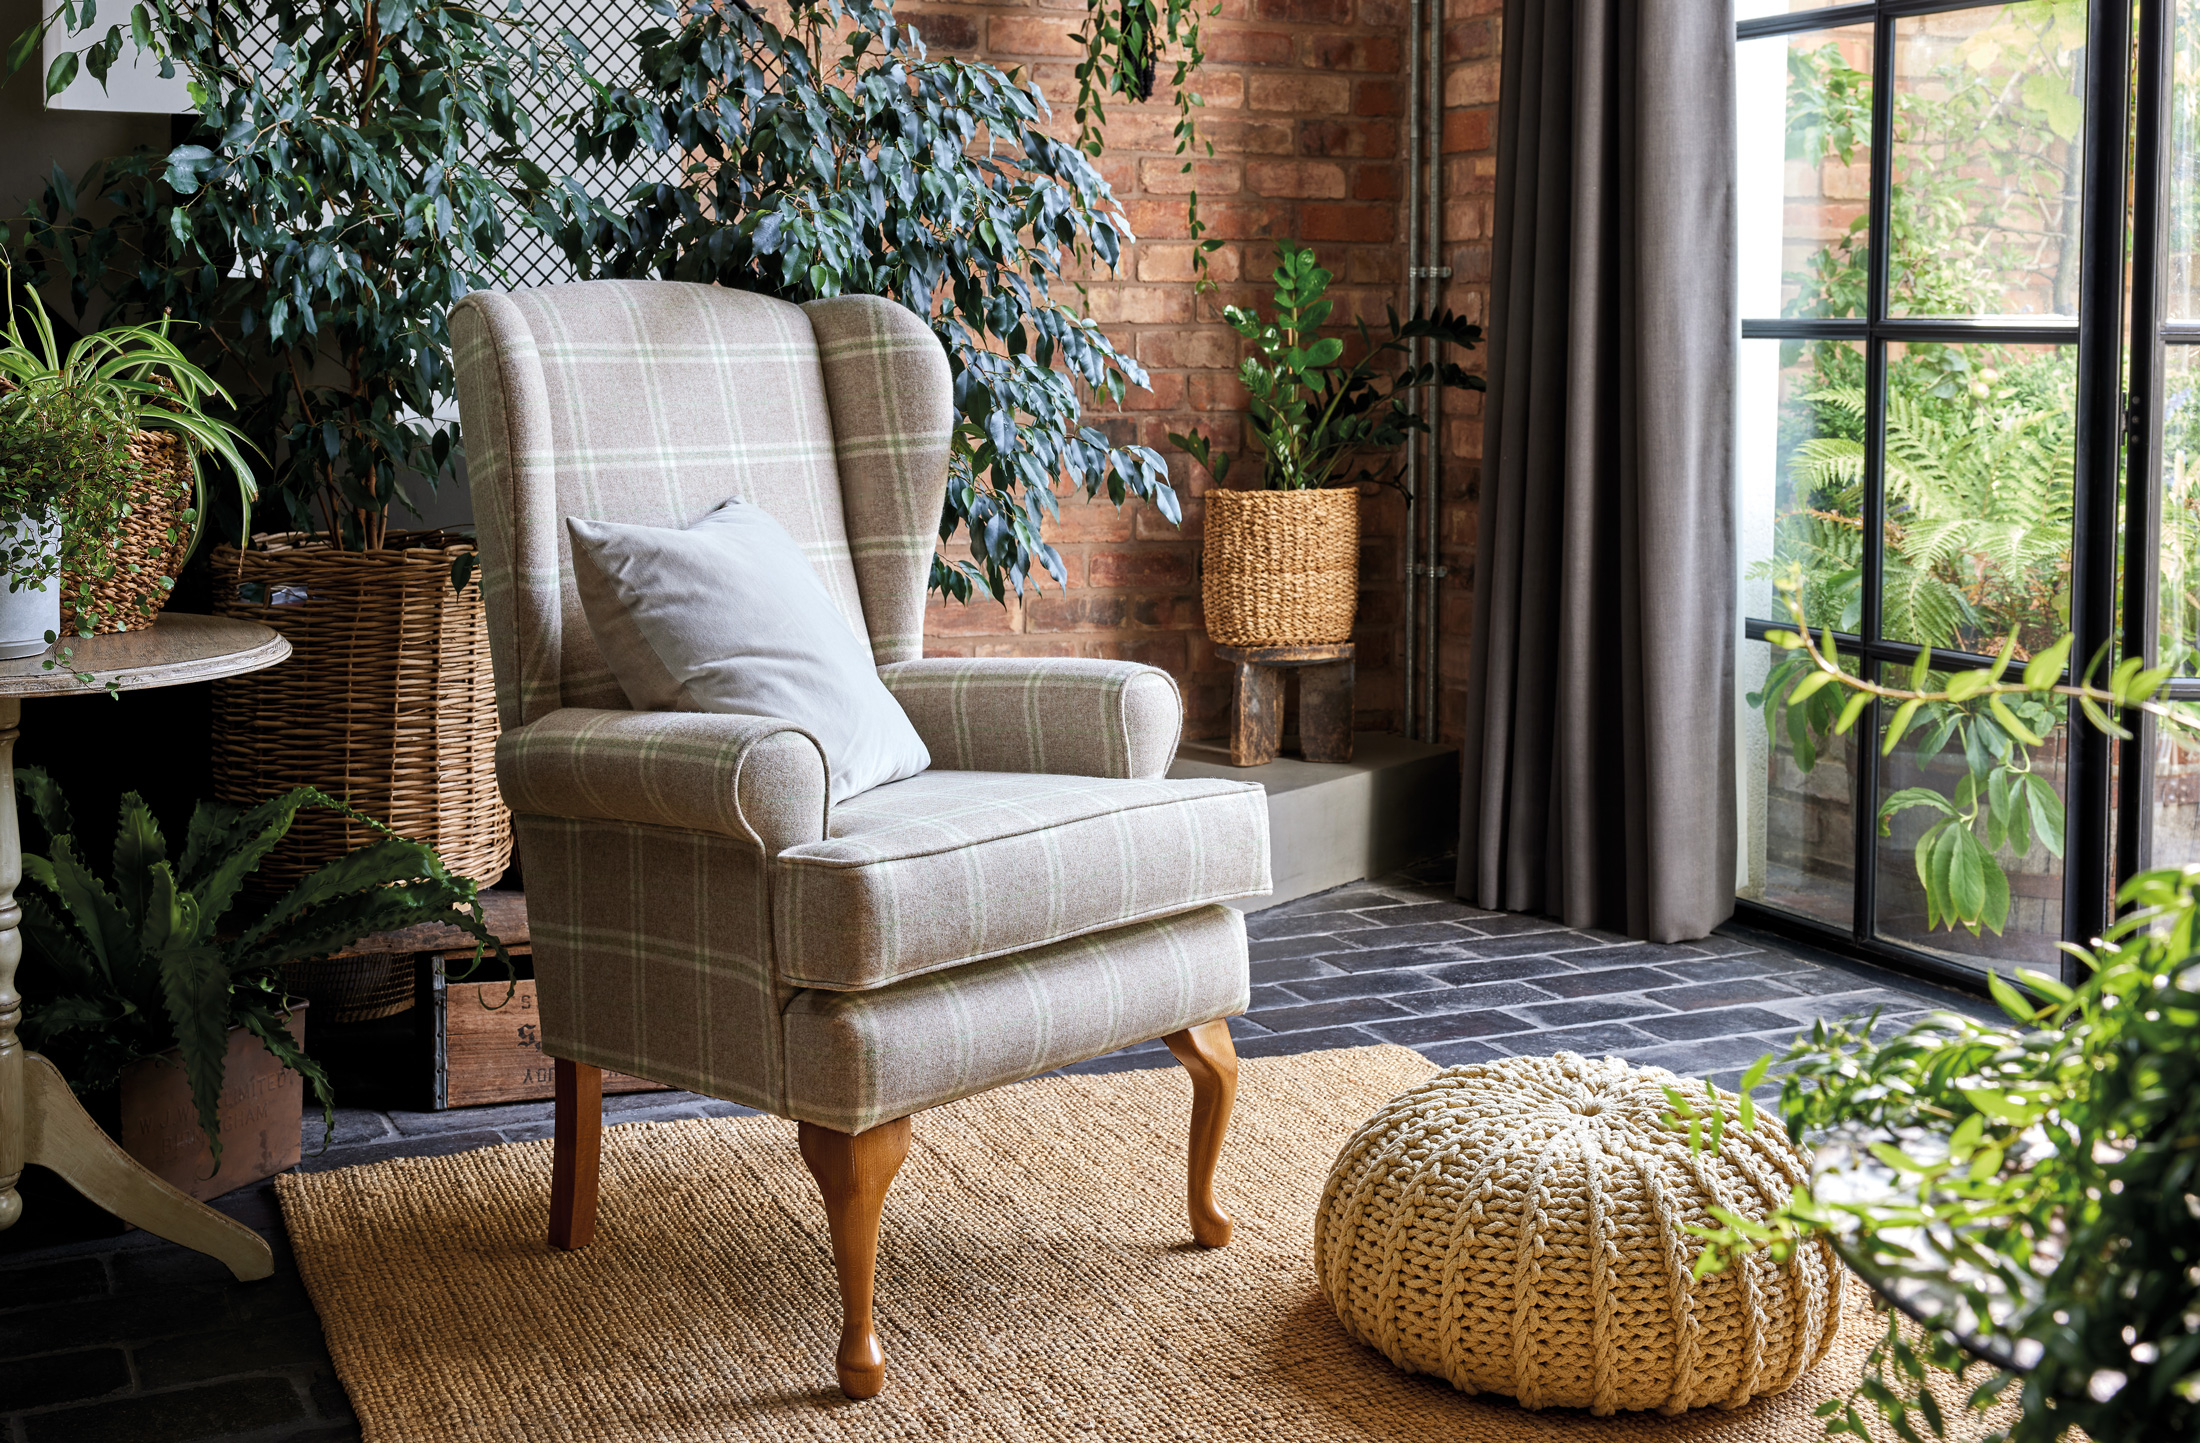 Finding the Perfect Comfortable Chair for Seniors